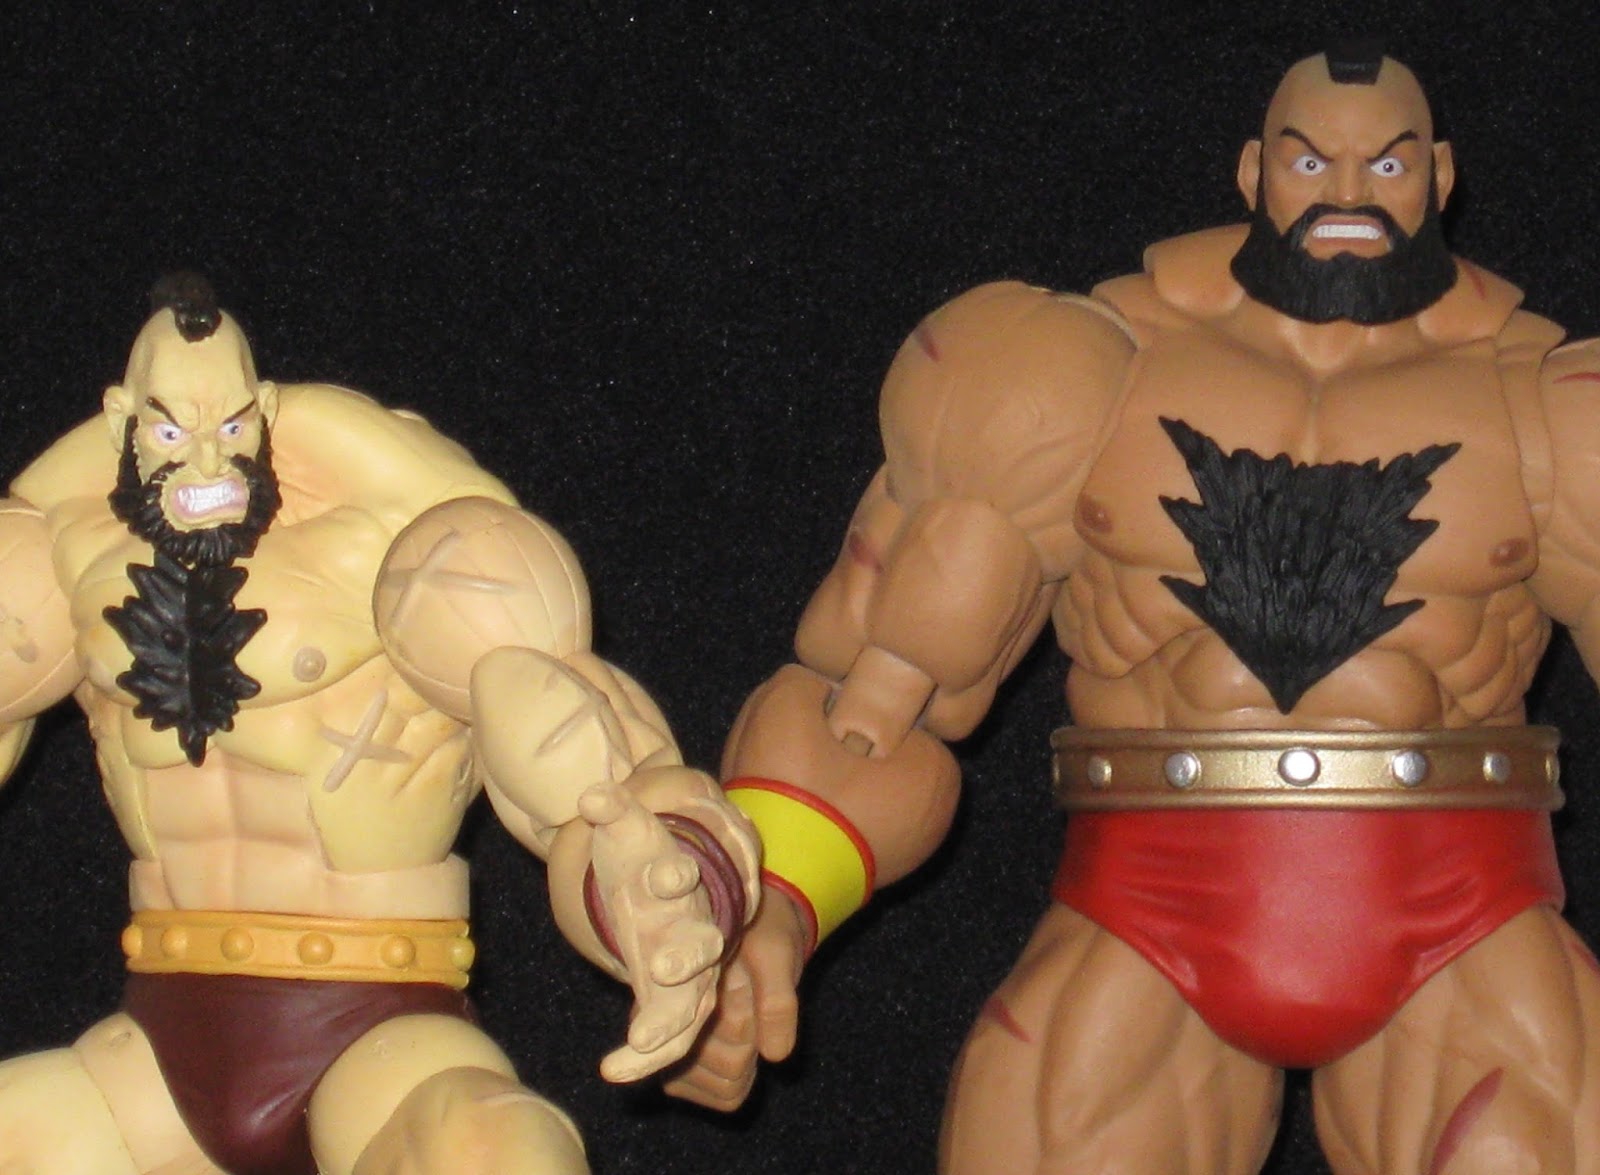 zangief storm collectibles